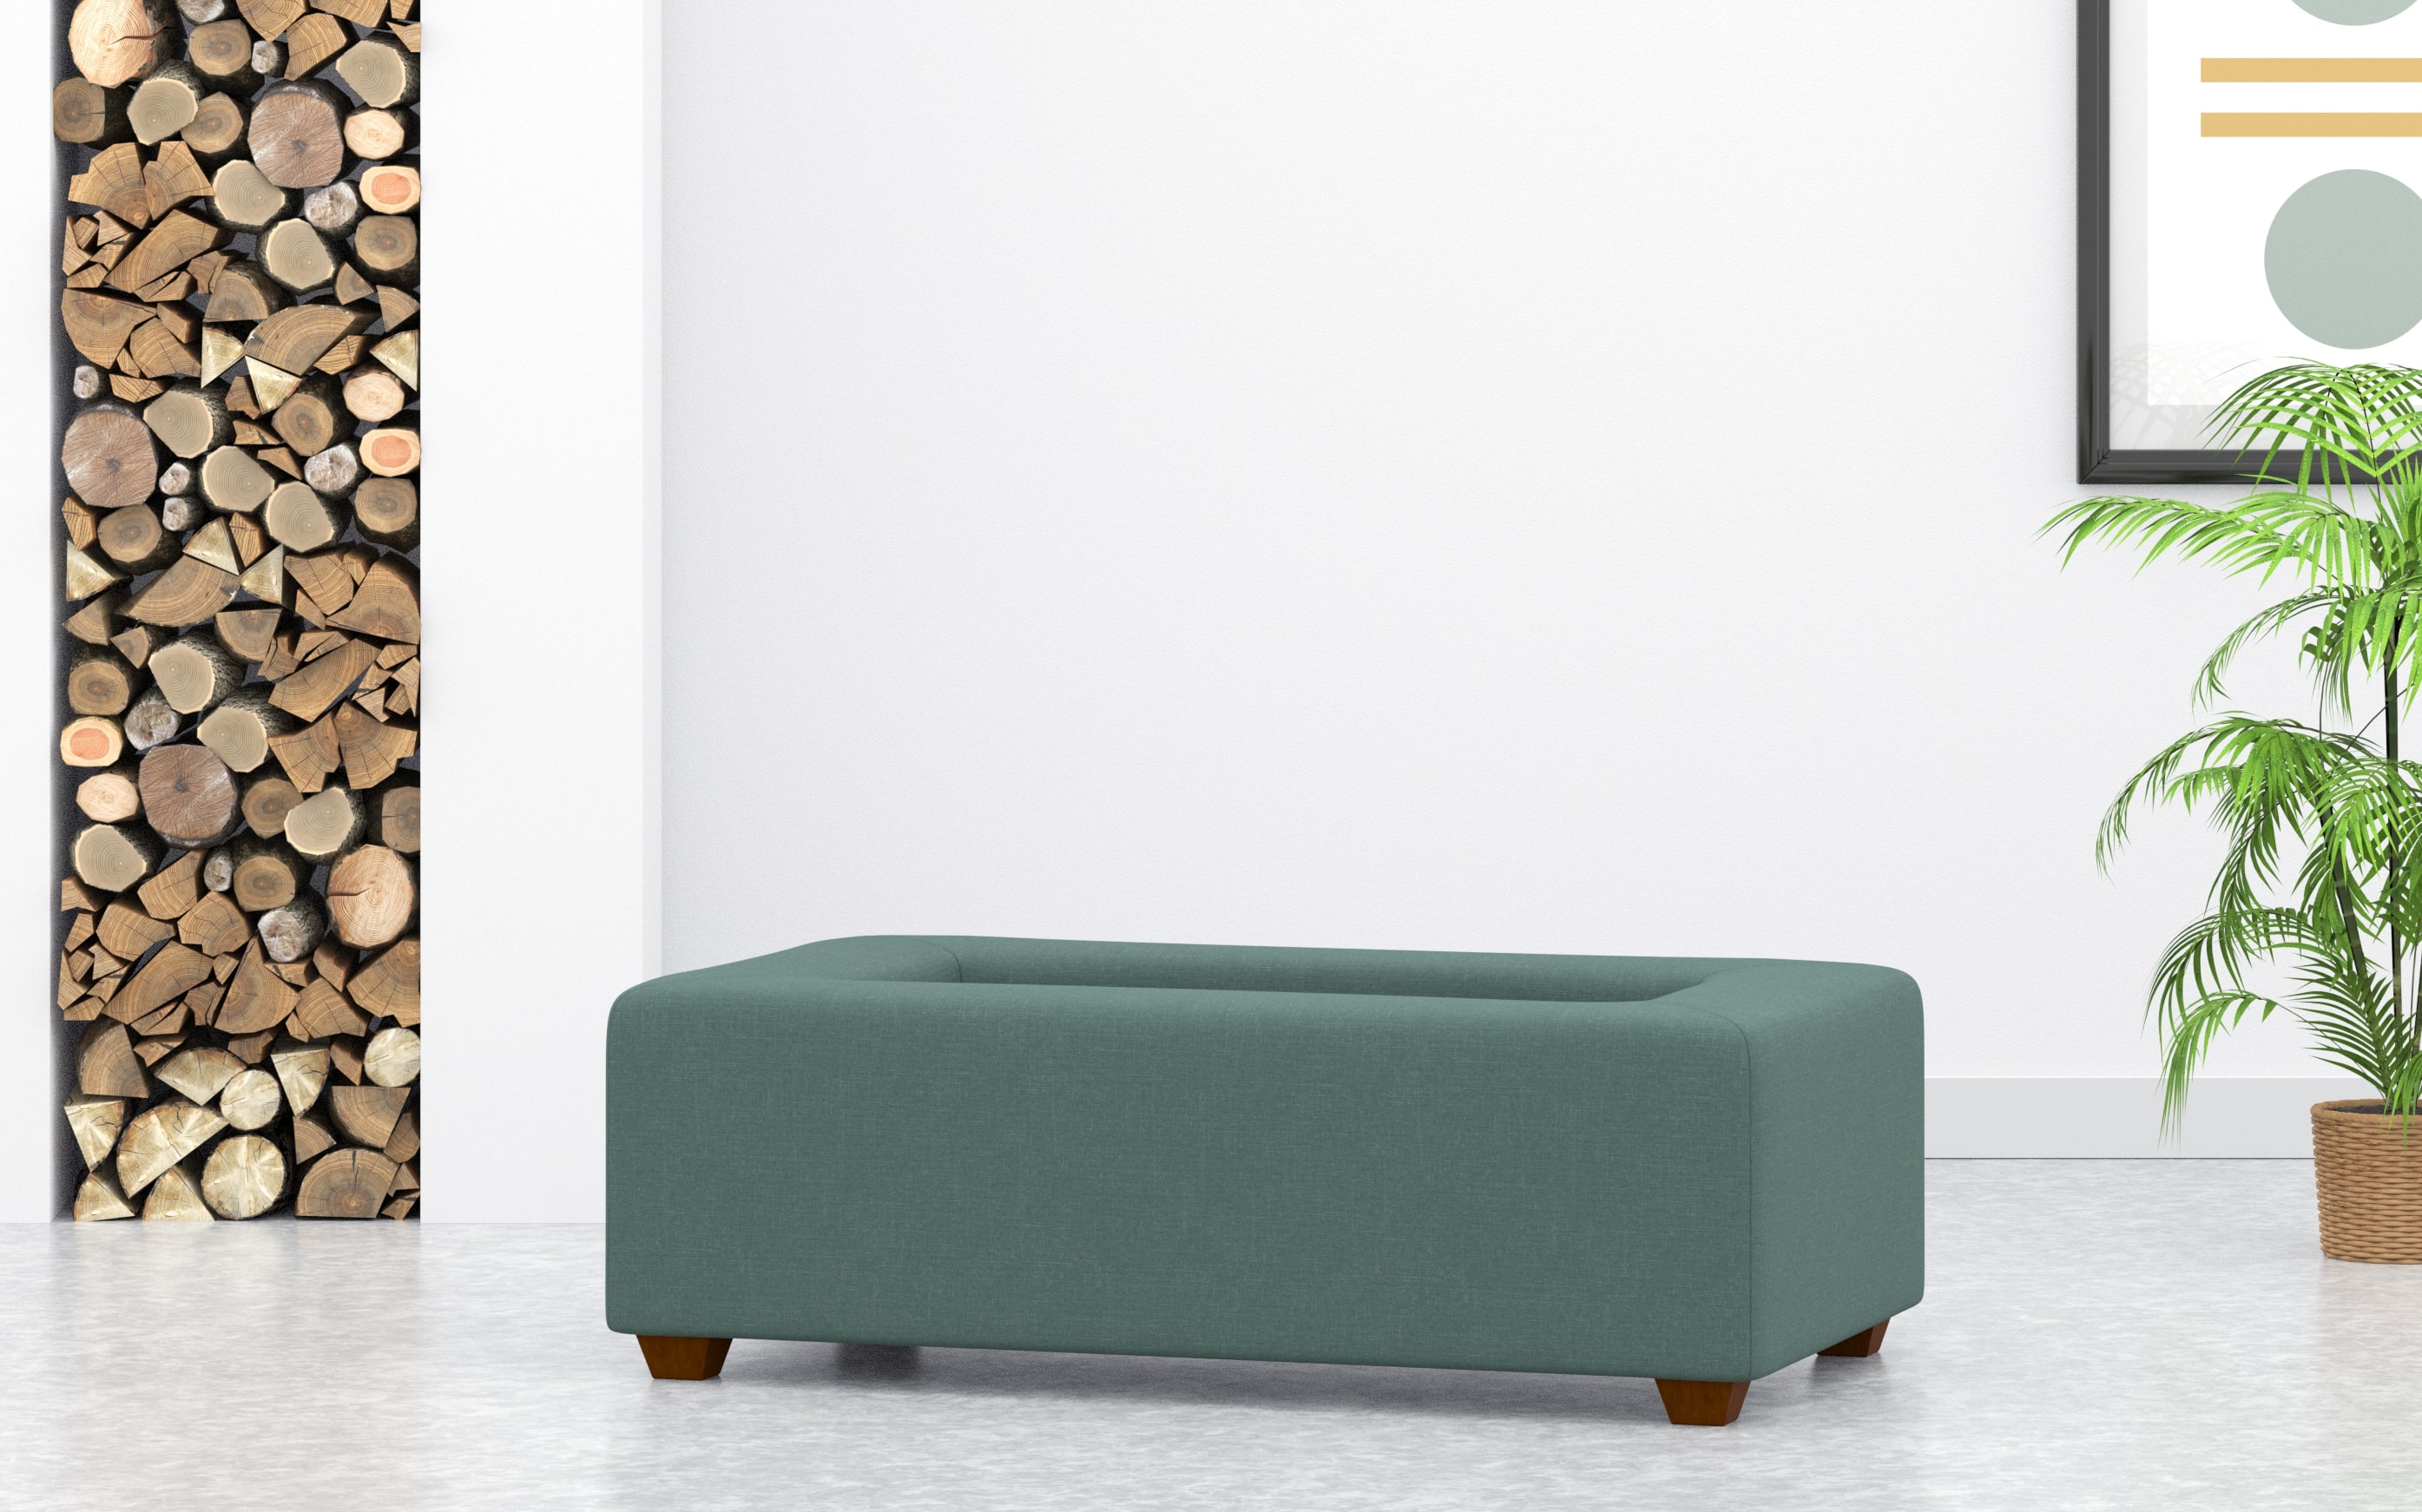 Rectangular Coffee Table Footstool With Built In Tray On Green Linen